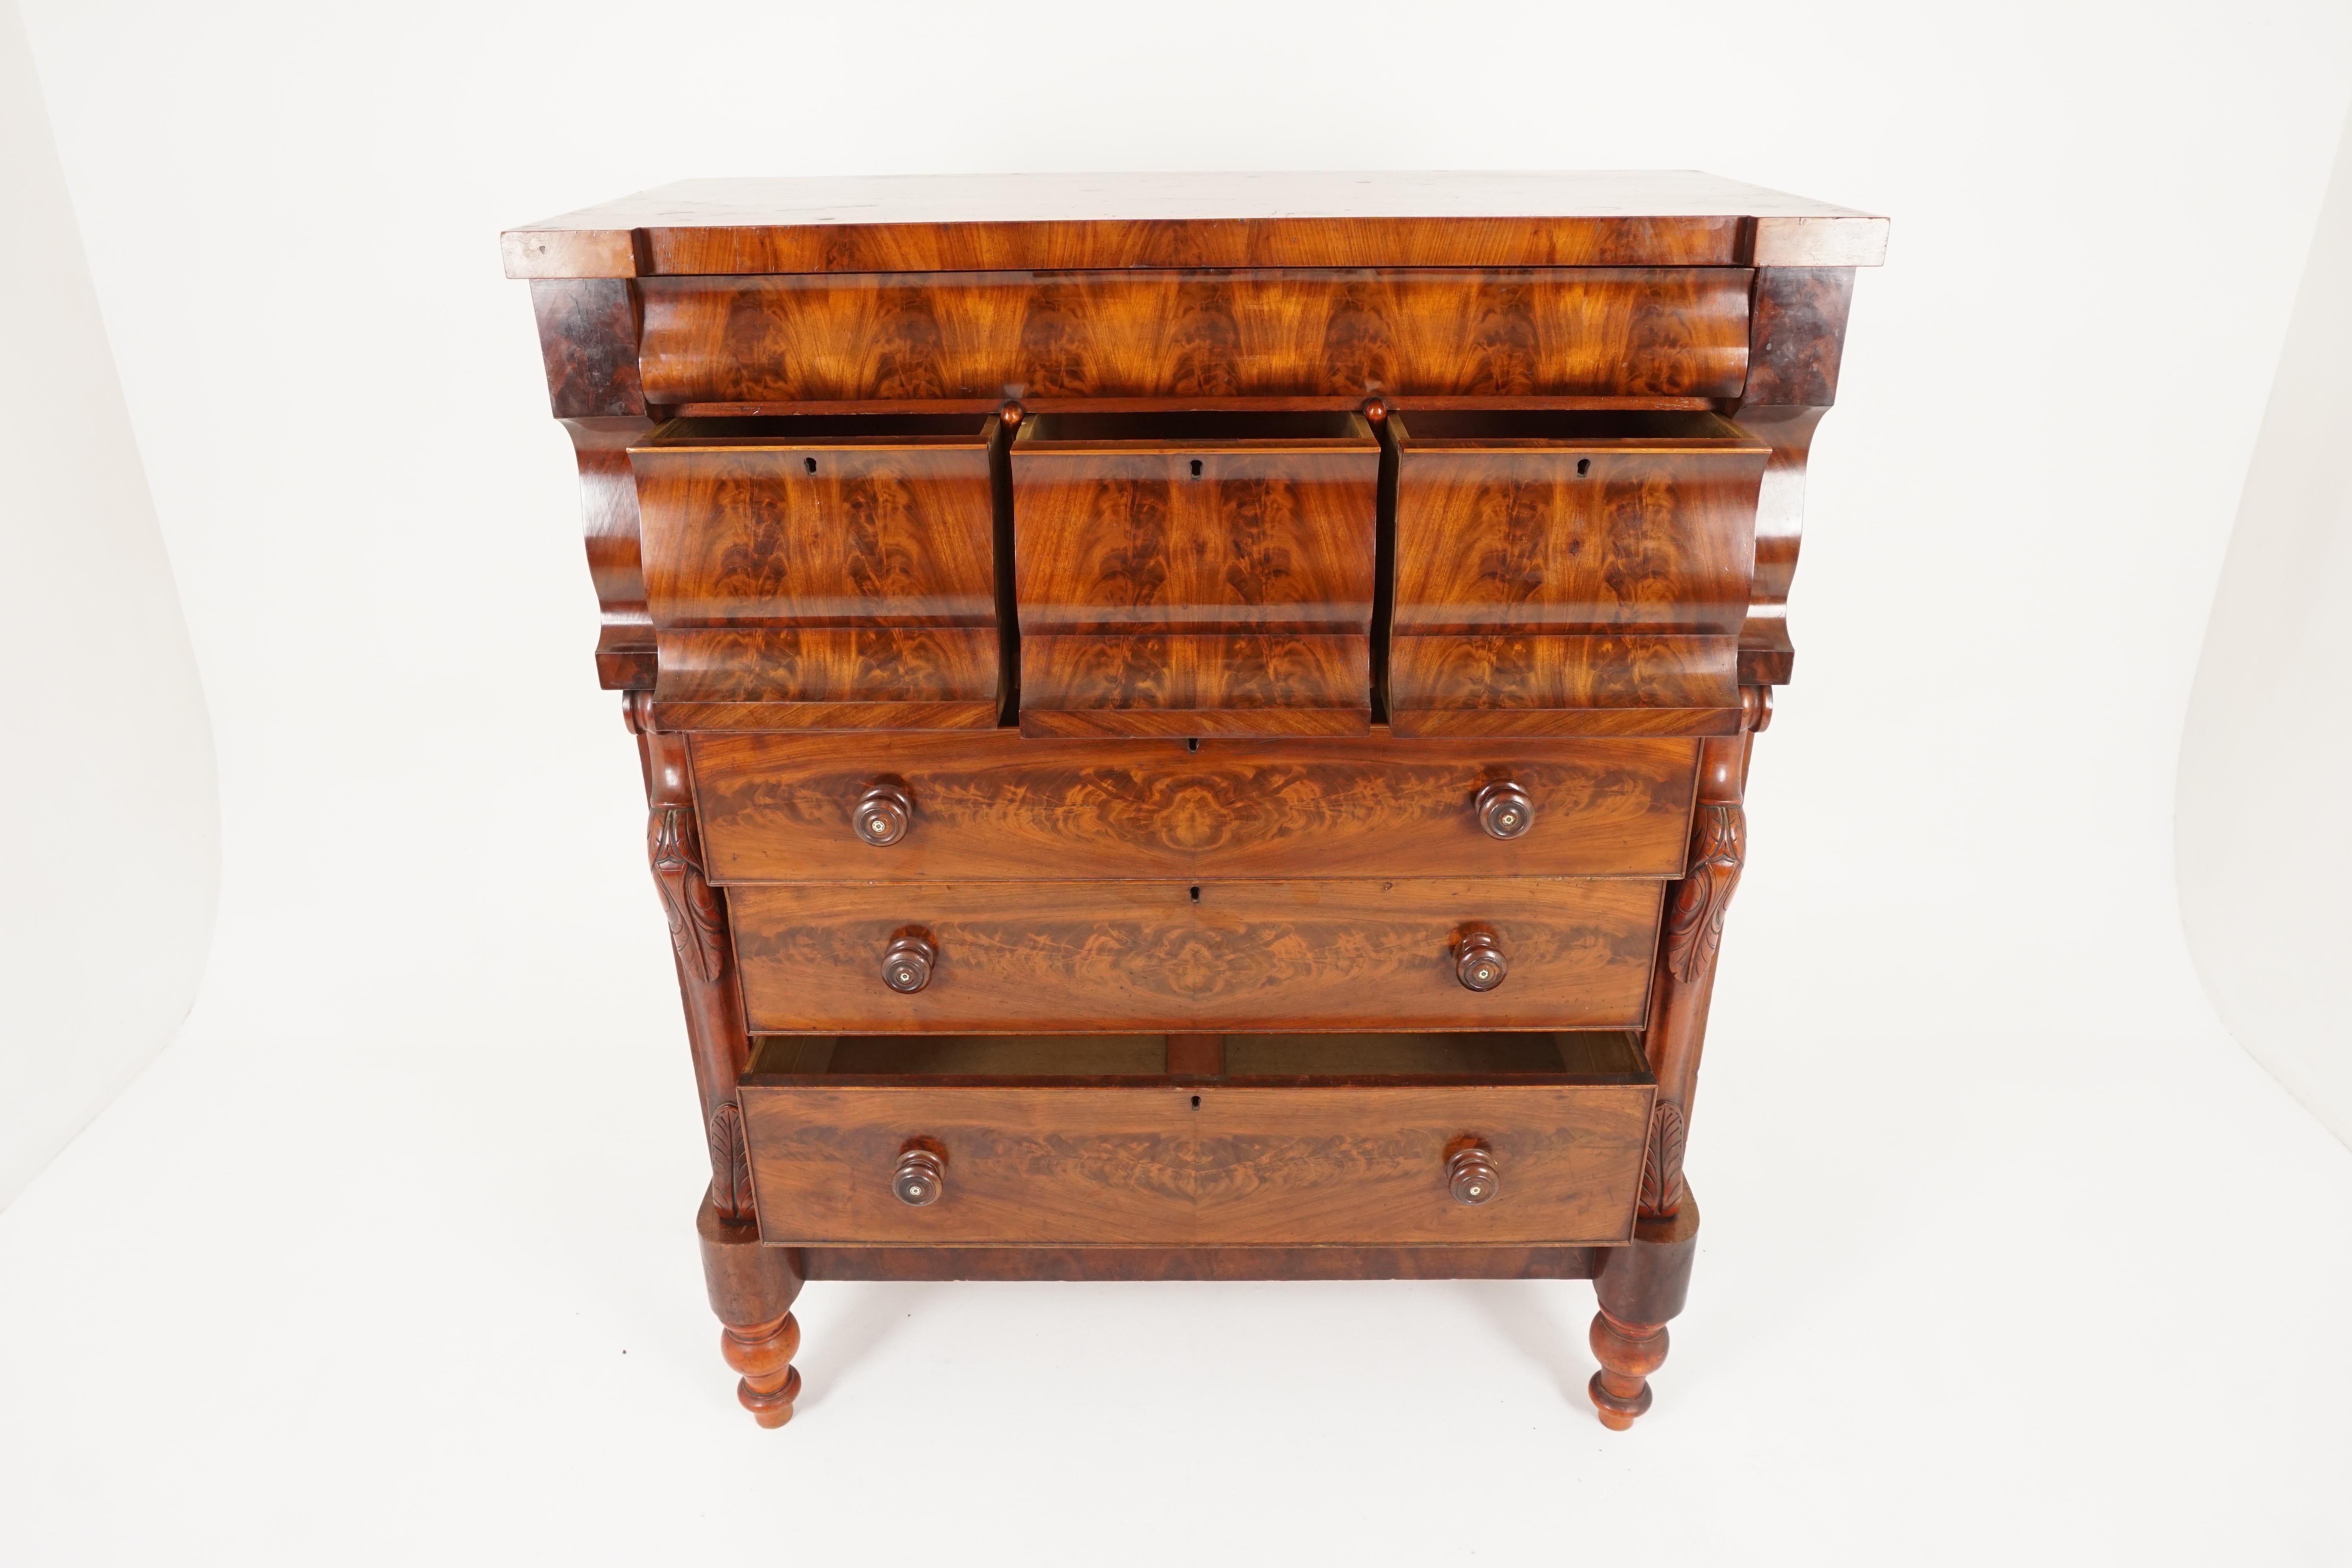 Antique Scottish flamed Walnut column chest of drawers, Scotland 1860, B2256

Scotland, 1860
Solid Walnut and veneer
Original Finish
Shaped top with flamed Walnut
Beneath is one long drawer which is ogee shaped over three deep 